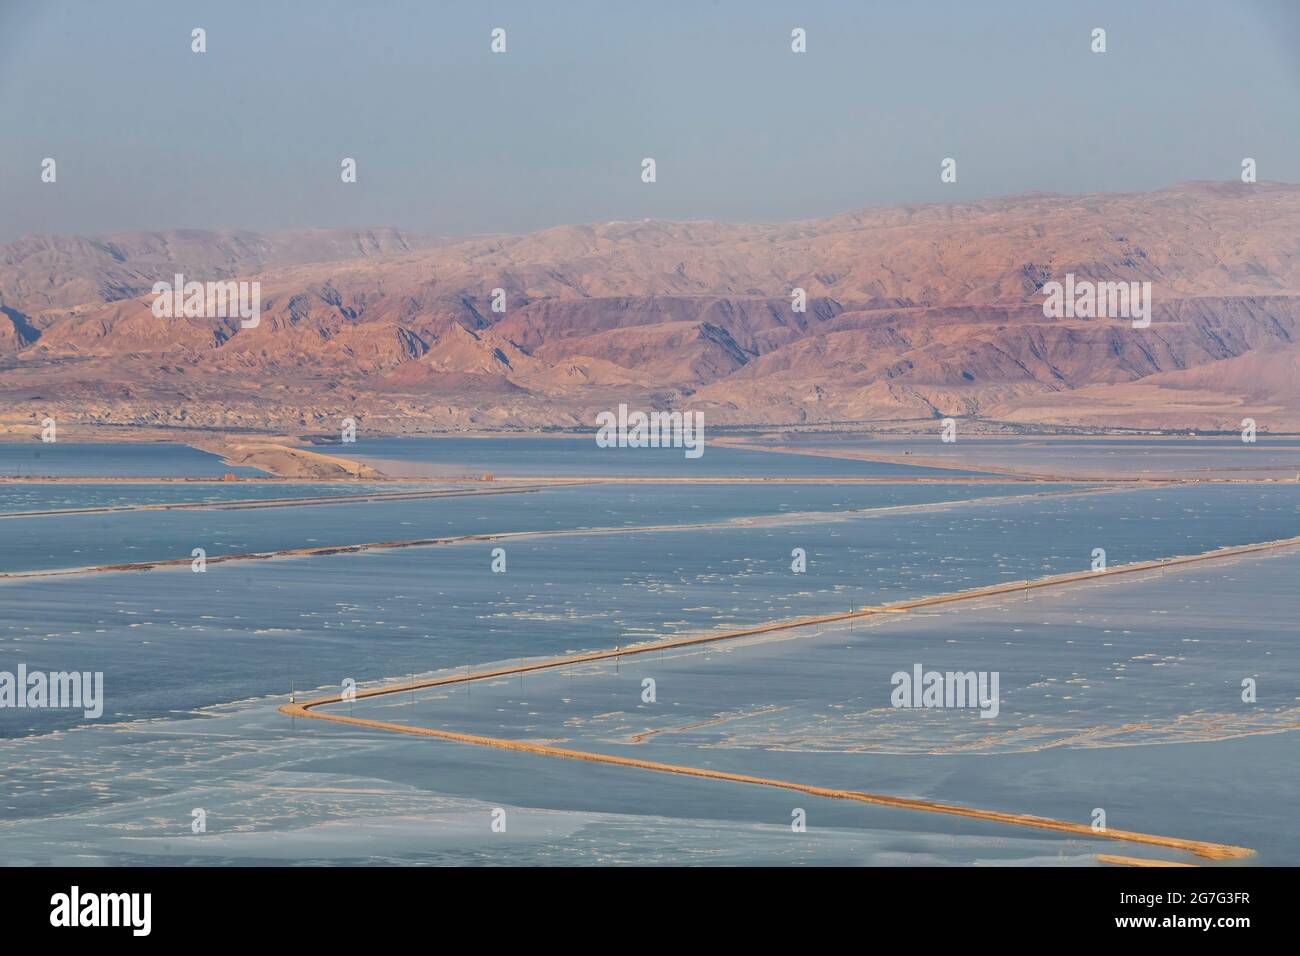 View of the Jordanian mountains through the saline waters of the Dead Sea at sunset. Israel Stock Photo